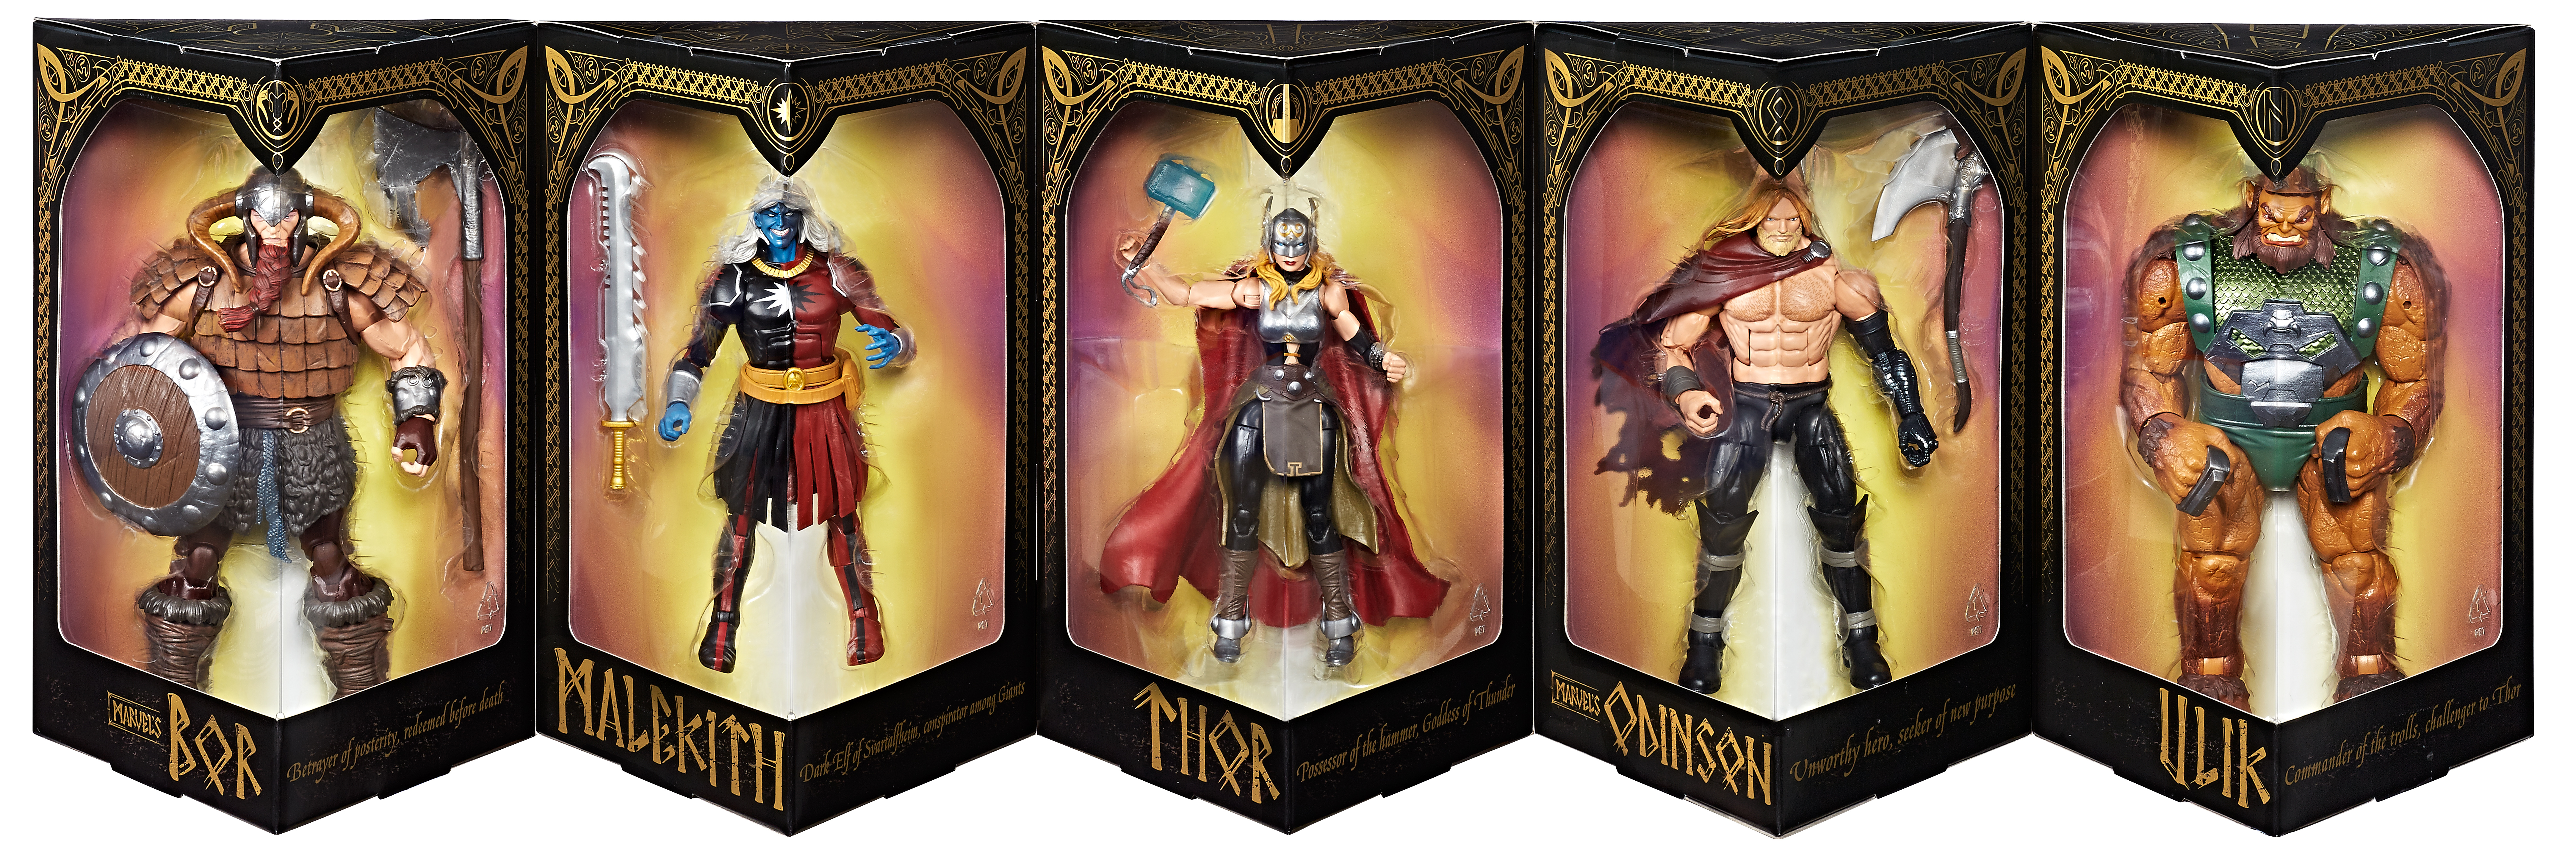 16 cm Actionfigur Jane Foster Hasbro C1803 Marvel Legends The Mighty Thor ca 